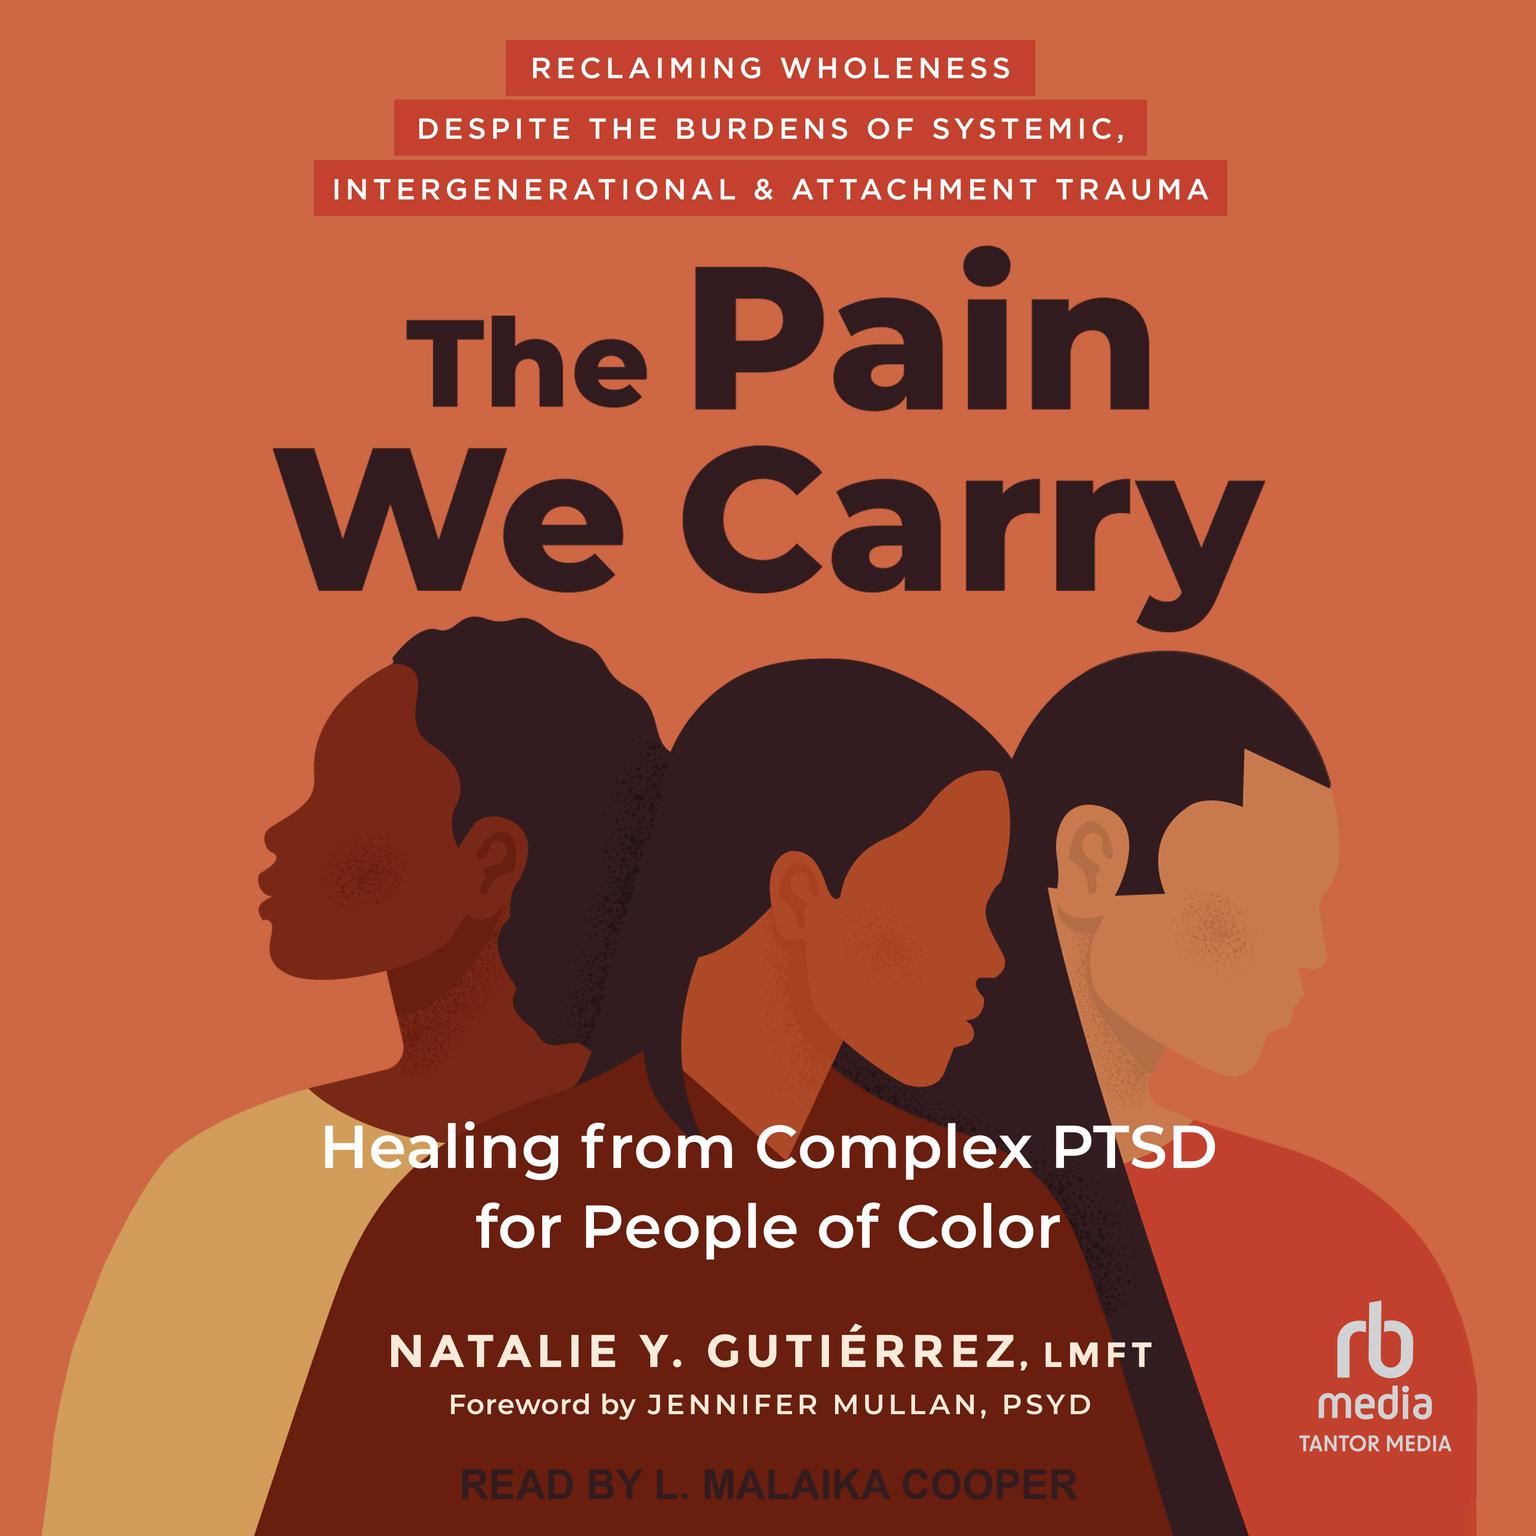 The Pain We Carry: Healing from Complex PTSD for People of Color Audiobook, by Natalie Y. Gutiérrez, LMFT